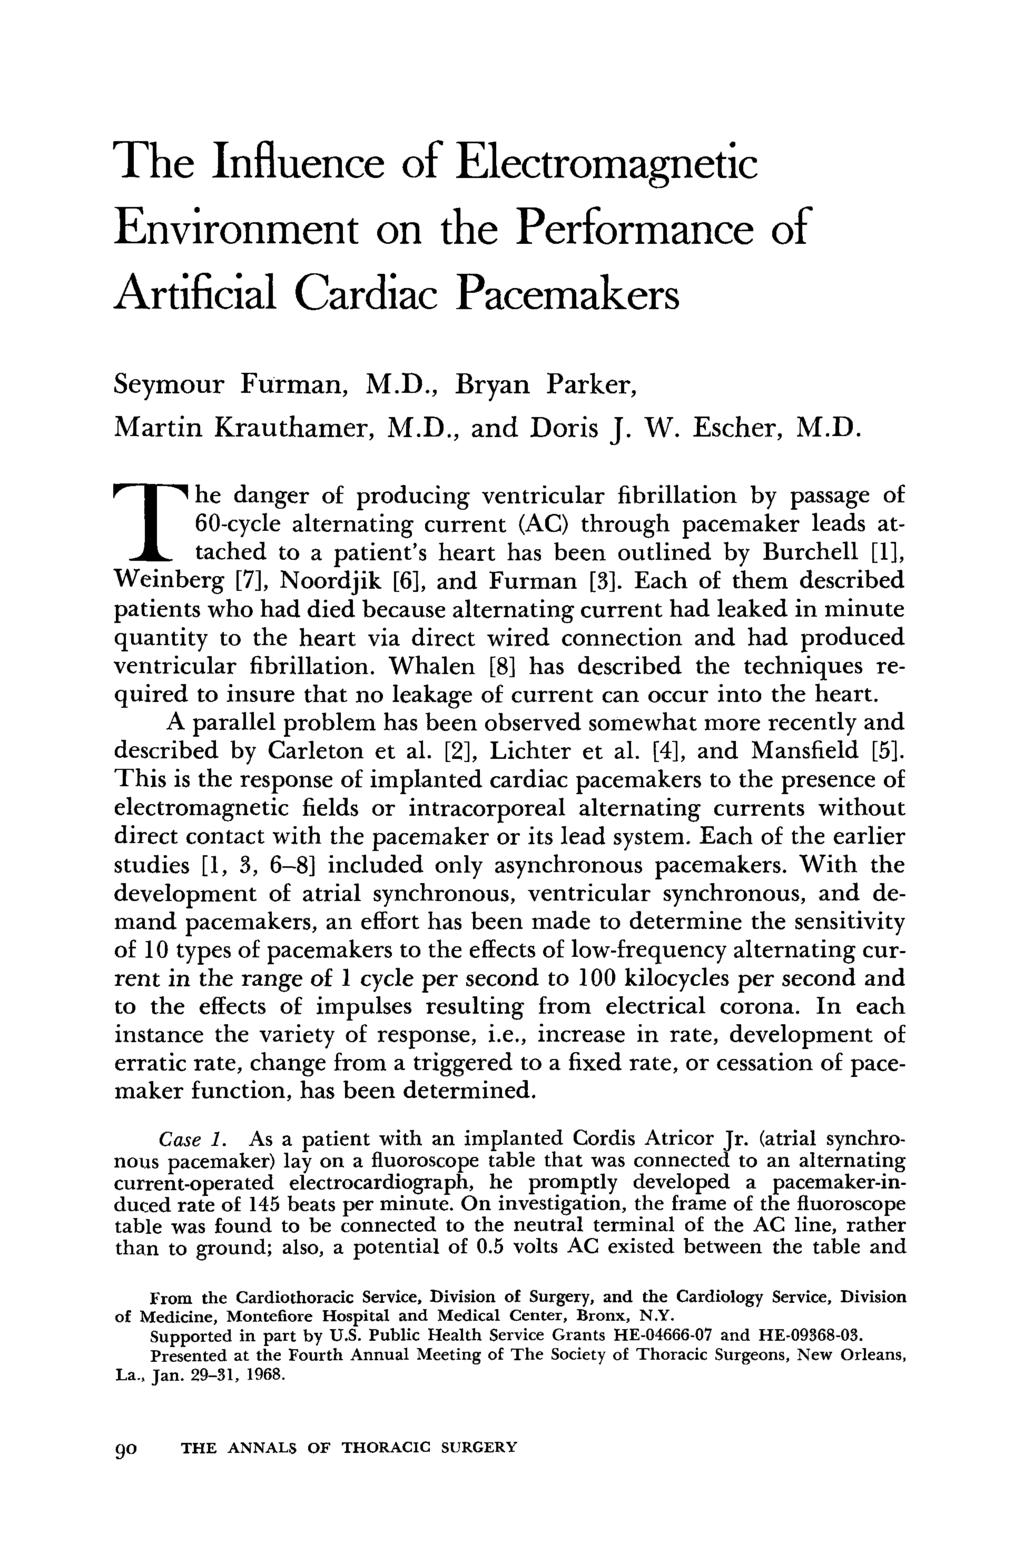 The nfluence of Electromagnetic Environment on the Performance of Artificial Cardiac Pacemakers Seymour Furman, M.D.